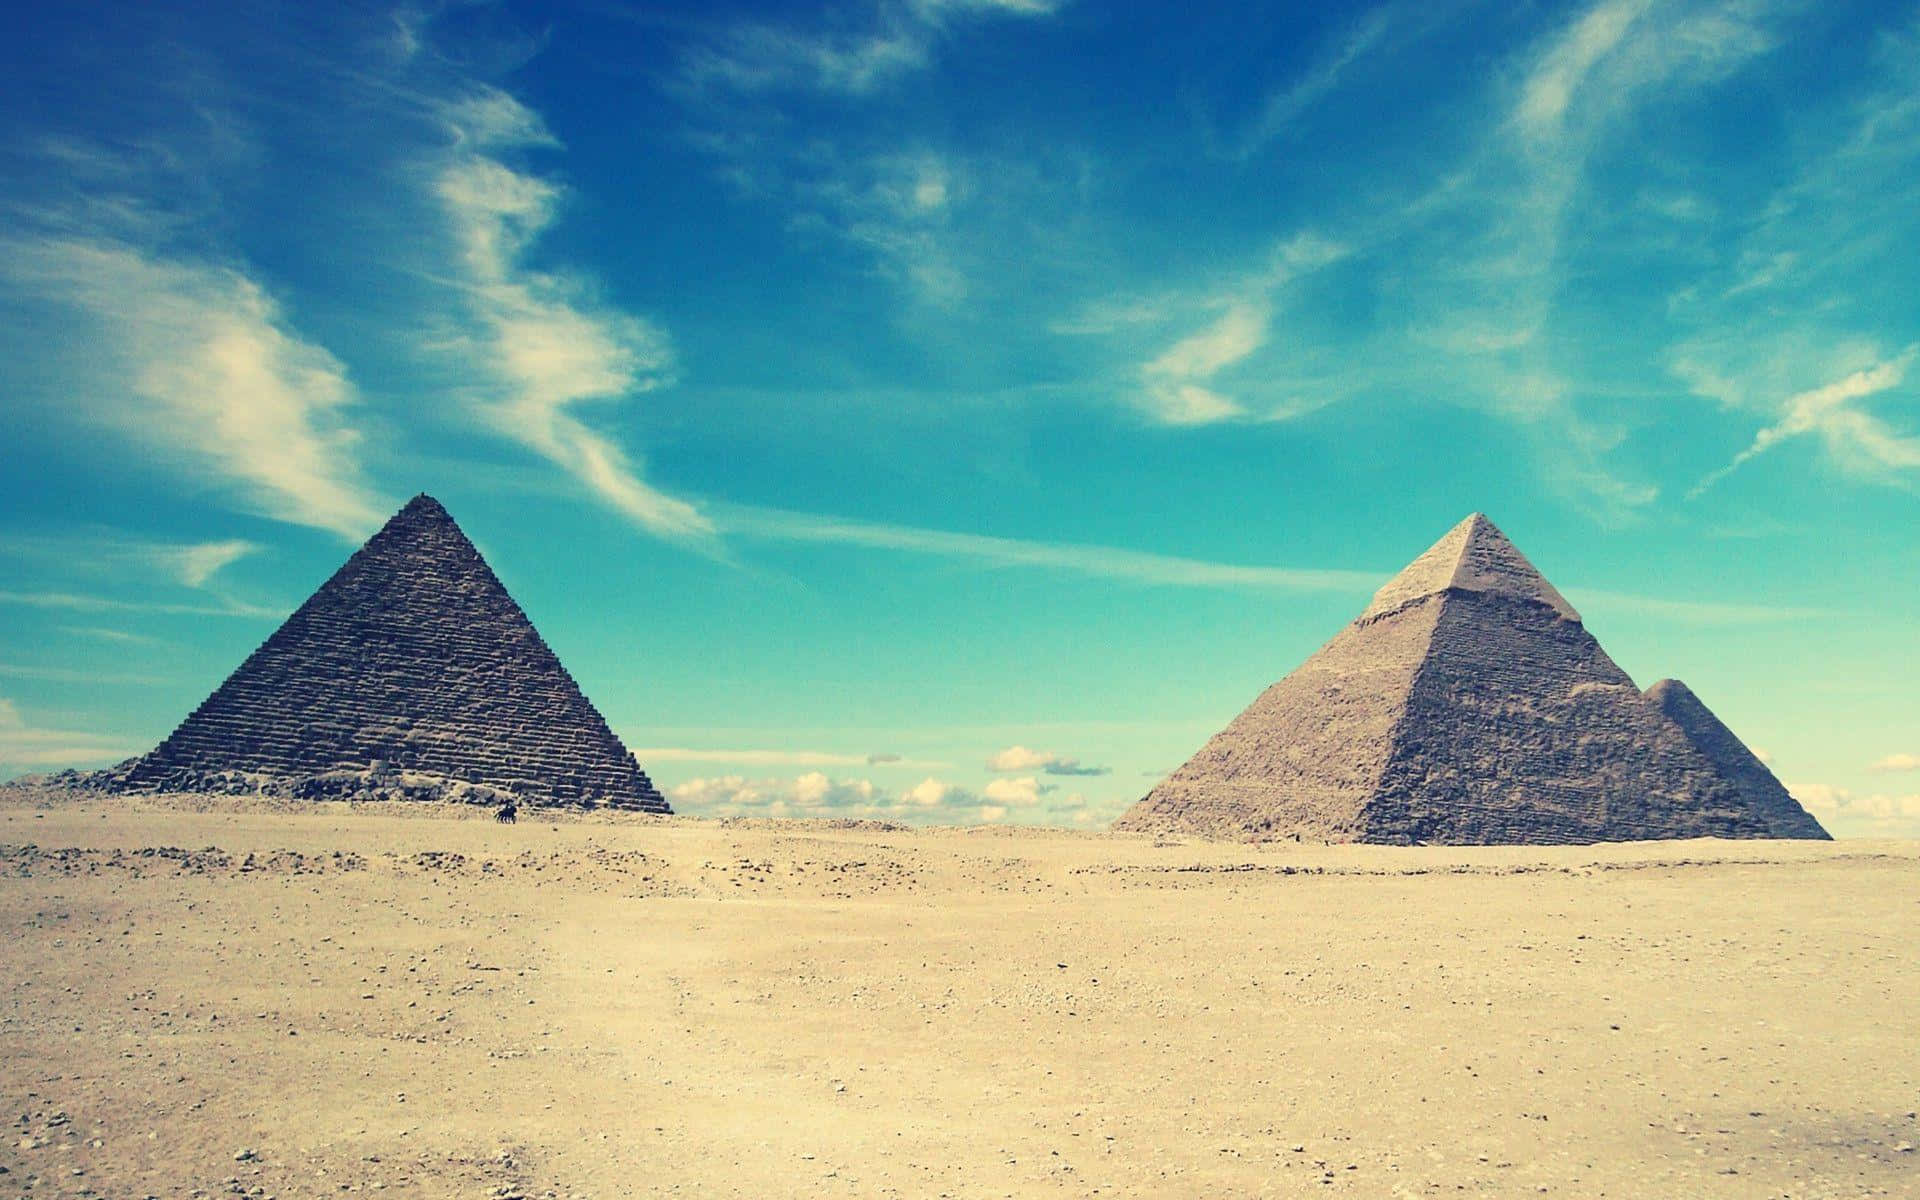 A sunlit tour of the majestic Pyramids of Giza